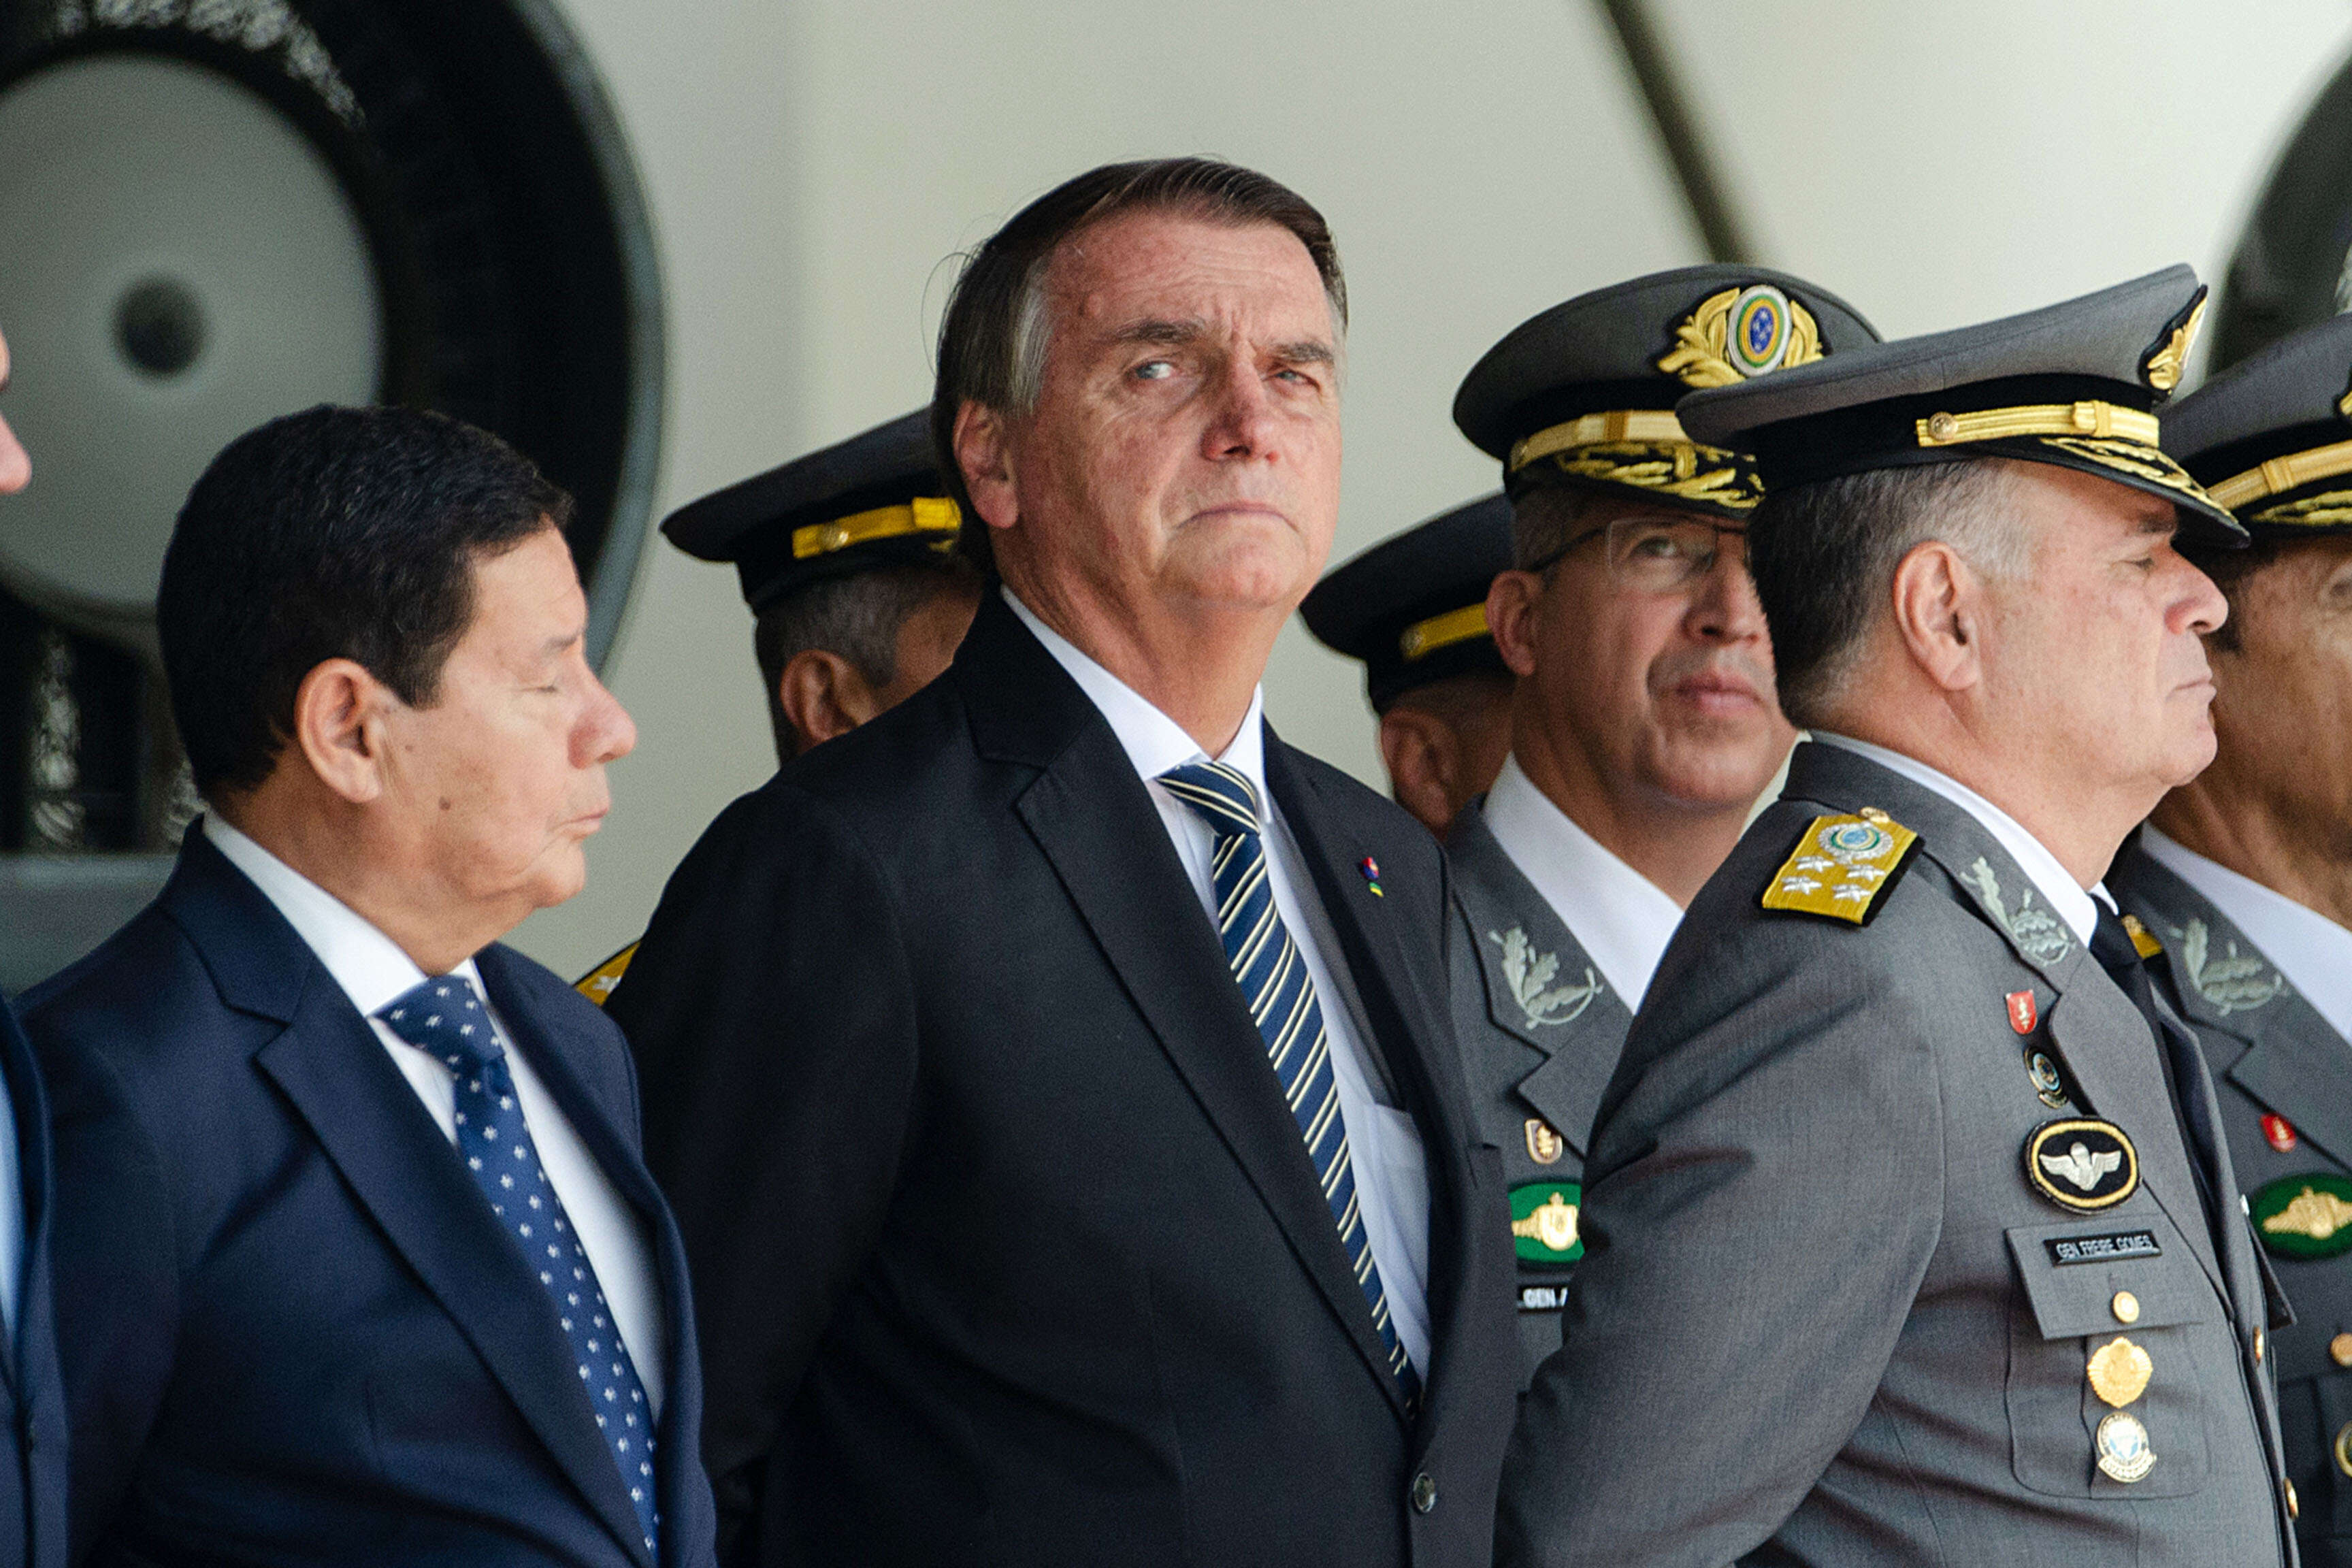 Brazilian President Jair Bolsonaro (C) attends next his Vice President Hamilton Mourao (L) and Commander of the Army General Marco Antonio Freire Gomes a graduation ceremony for cadets at the Agulhas Negras Military Academy in Resende, Rio de Janeiro State, Brazil, on November 26, 2022. - Bolsonaro has returned to a public event after more than three weeks without a public appearance following his election defeat by Luiz Inacio Lula da Silva. (Photo by TÉRCIO TEIXEIRA / AFP)